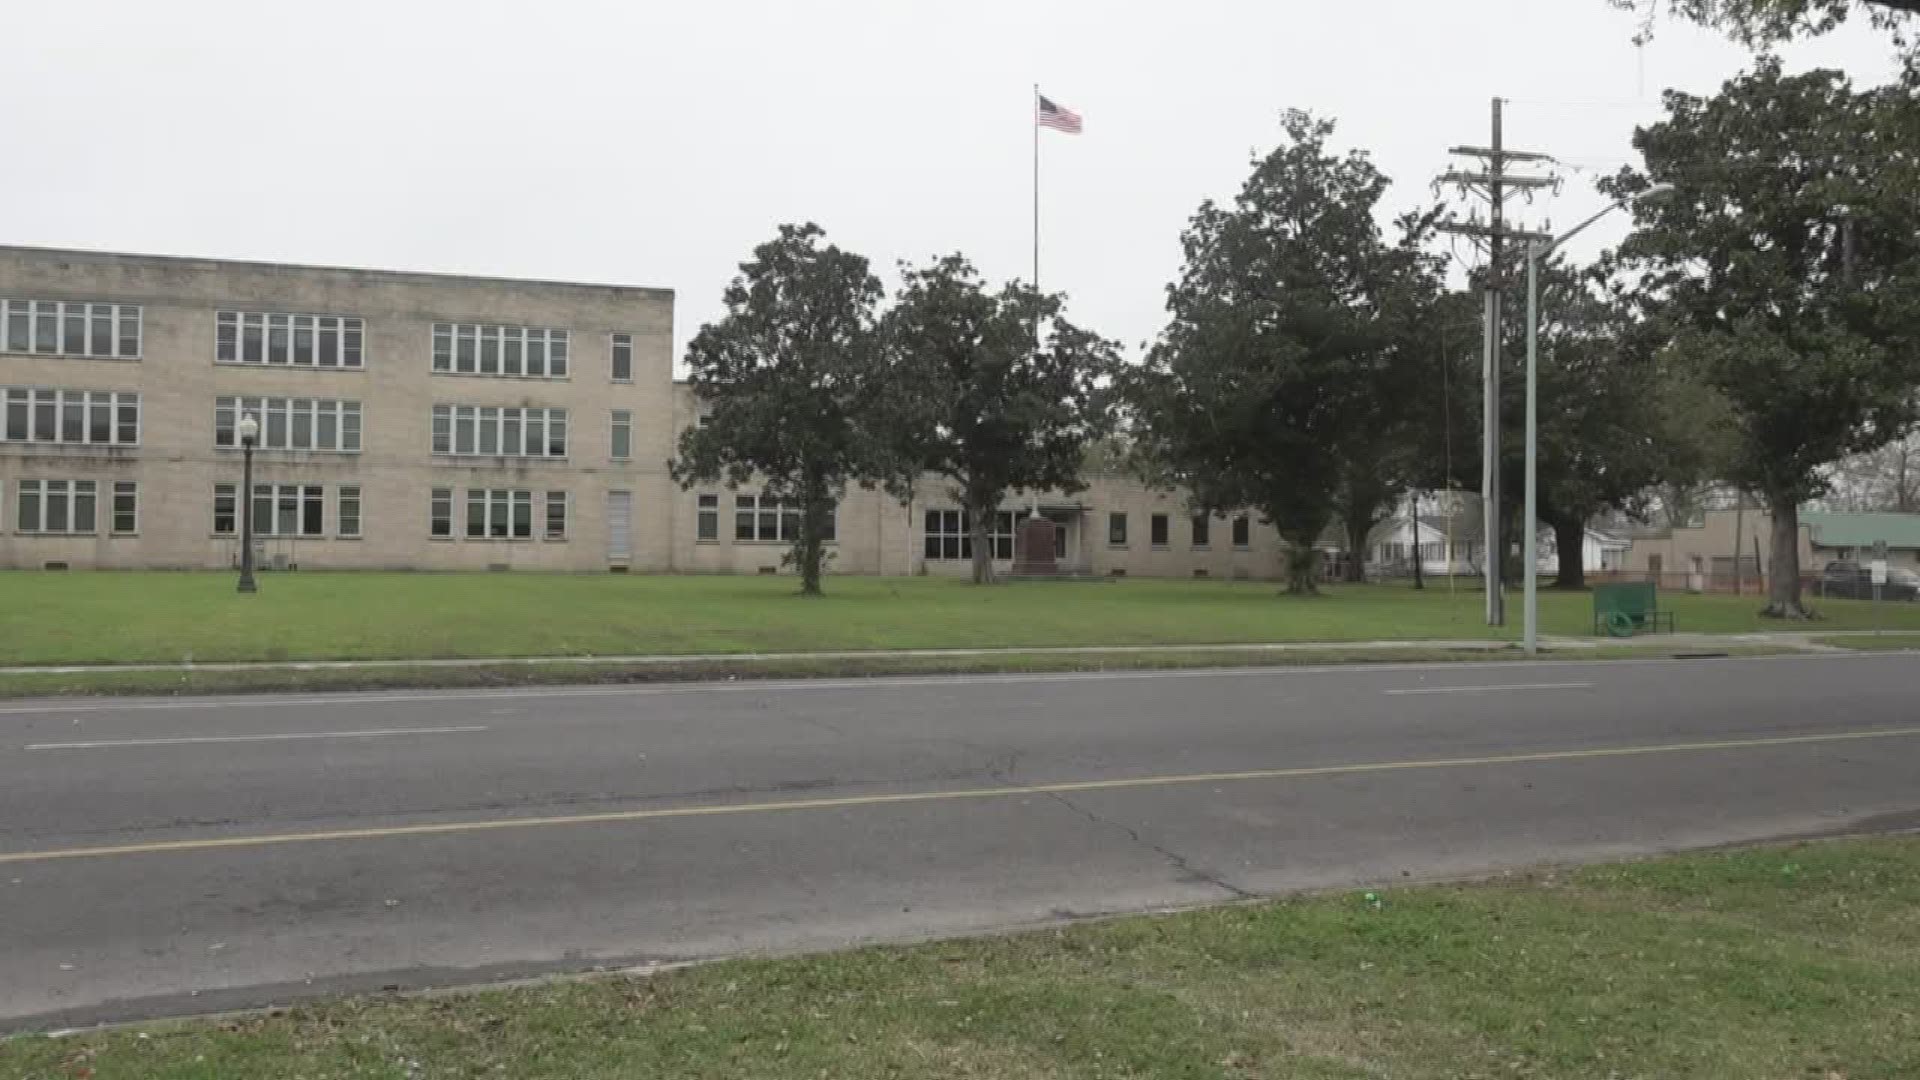 Authorities say two Terrebonne High School employees are being investigated after alleged "inappropriate behavior" with students.